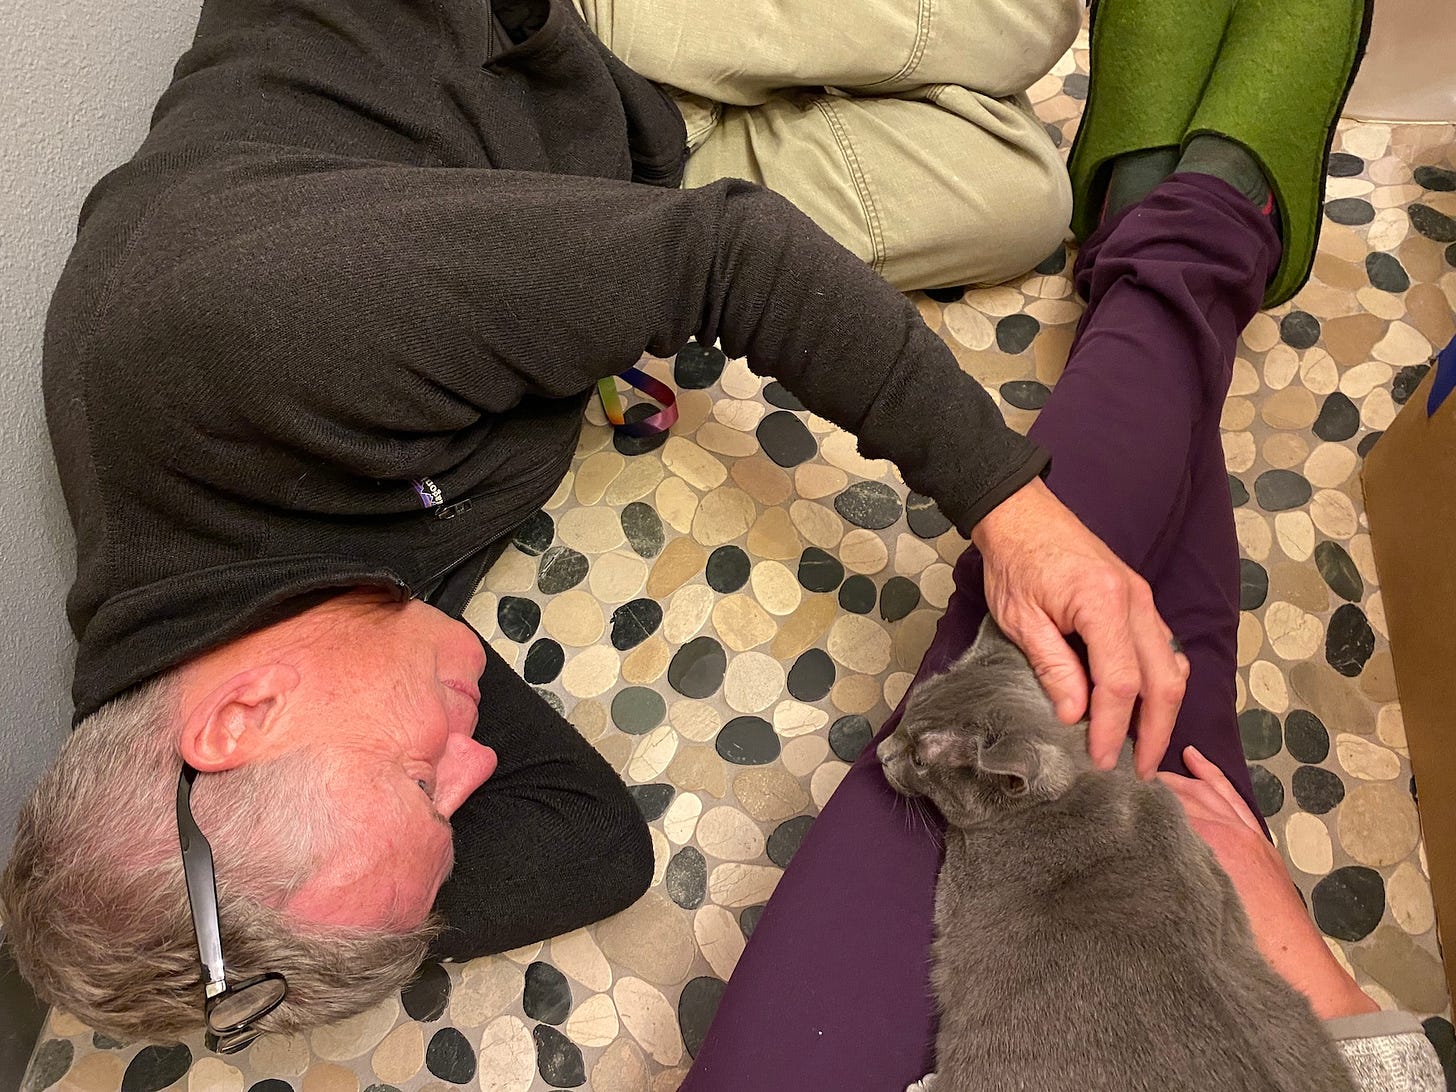 A view from above as a gray cat lays on the lap of a person wearing purple pants and a man lays on his side stroking the cats head.